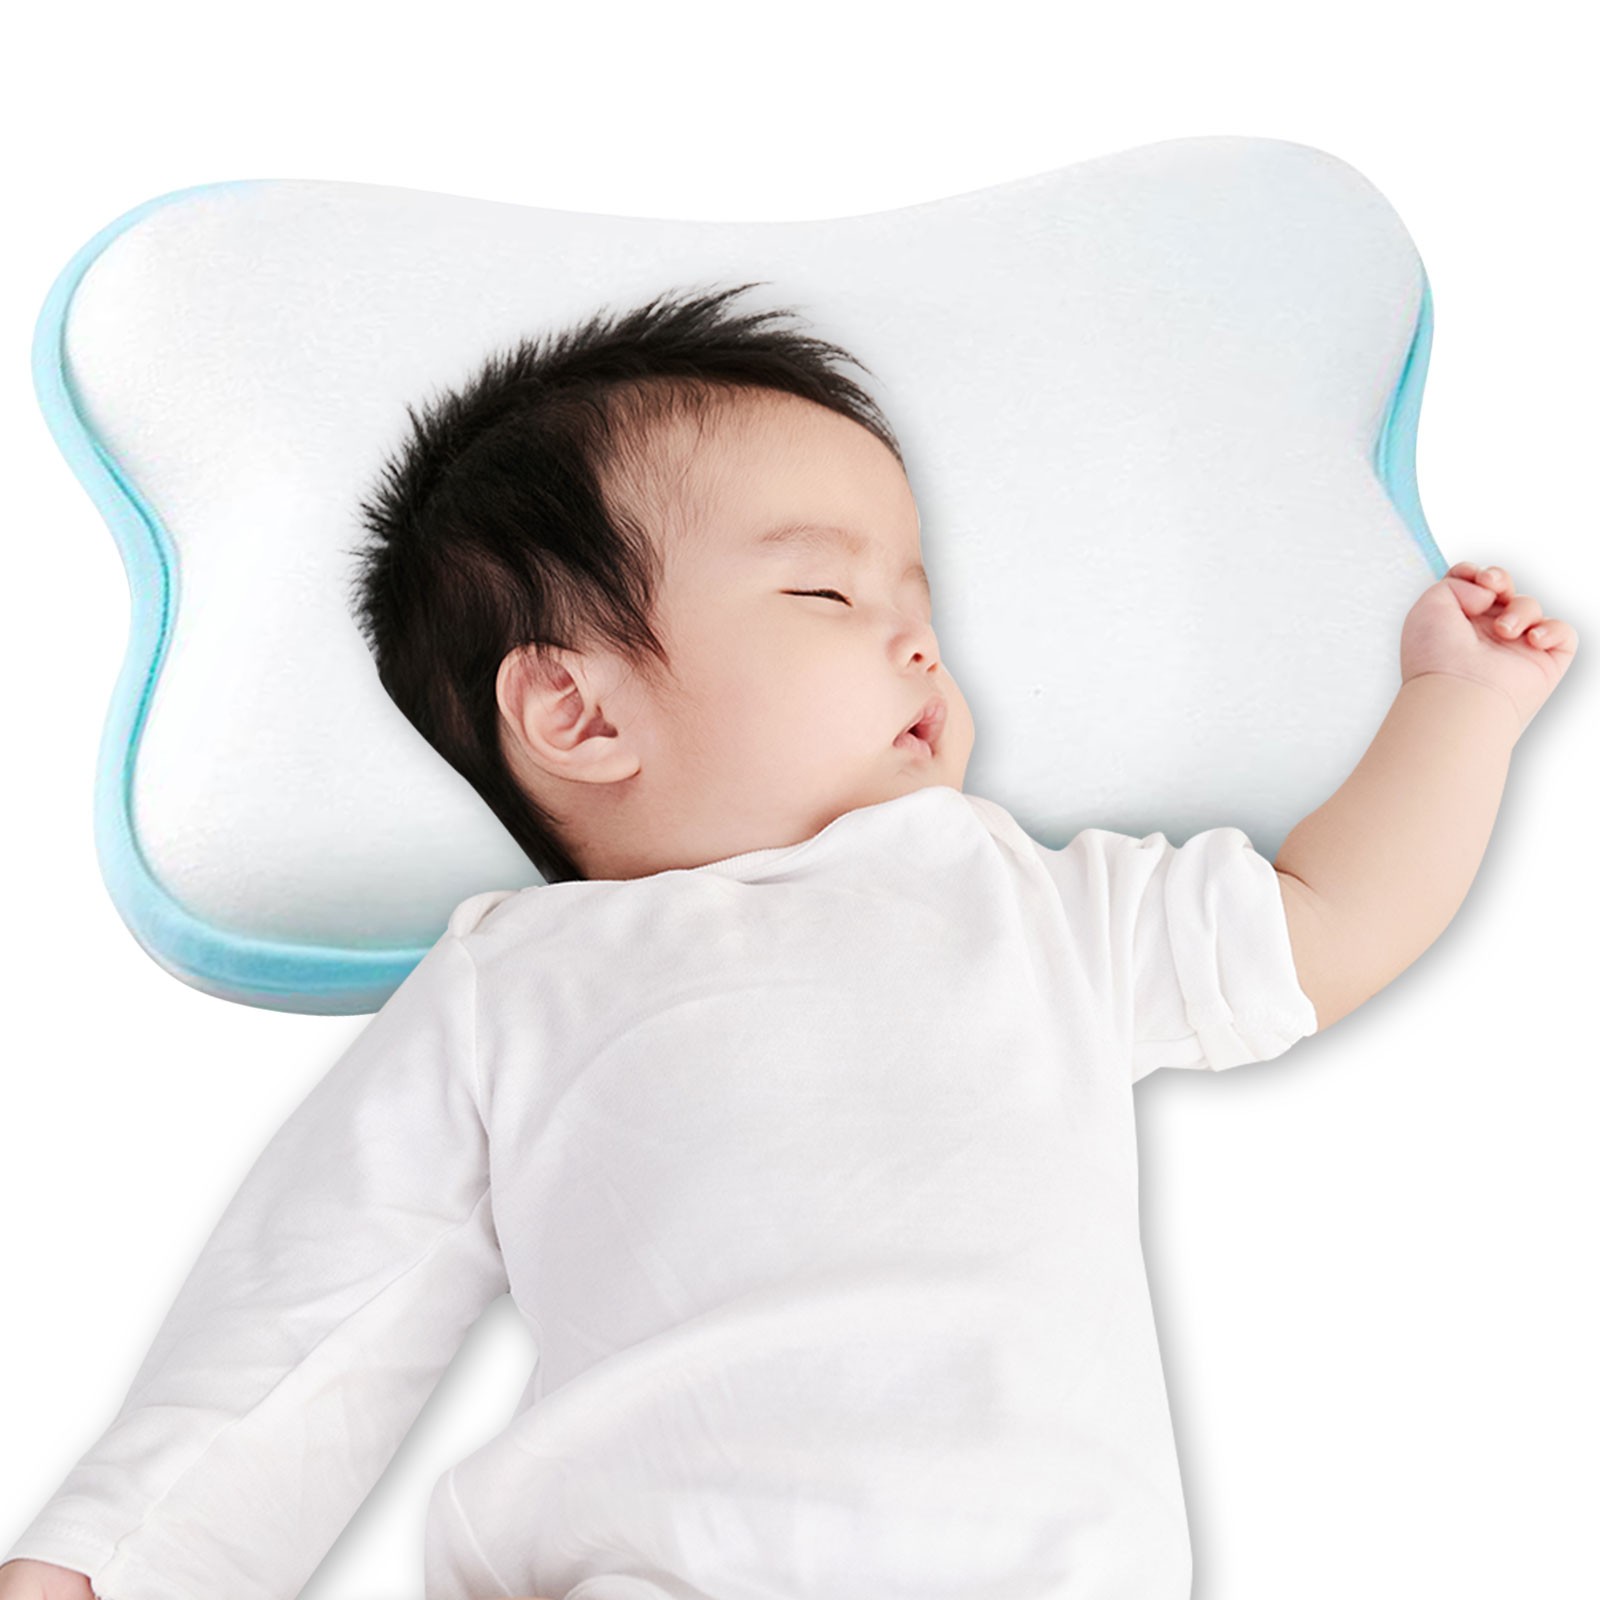 Baby Memory Cotton Pillow Infant Head Shaping Pillow Prevent Flat Head Syndrome 3D Newborn Baby Breathable Pillow Gifts